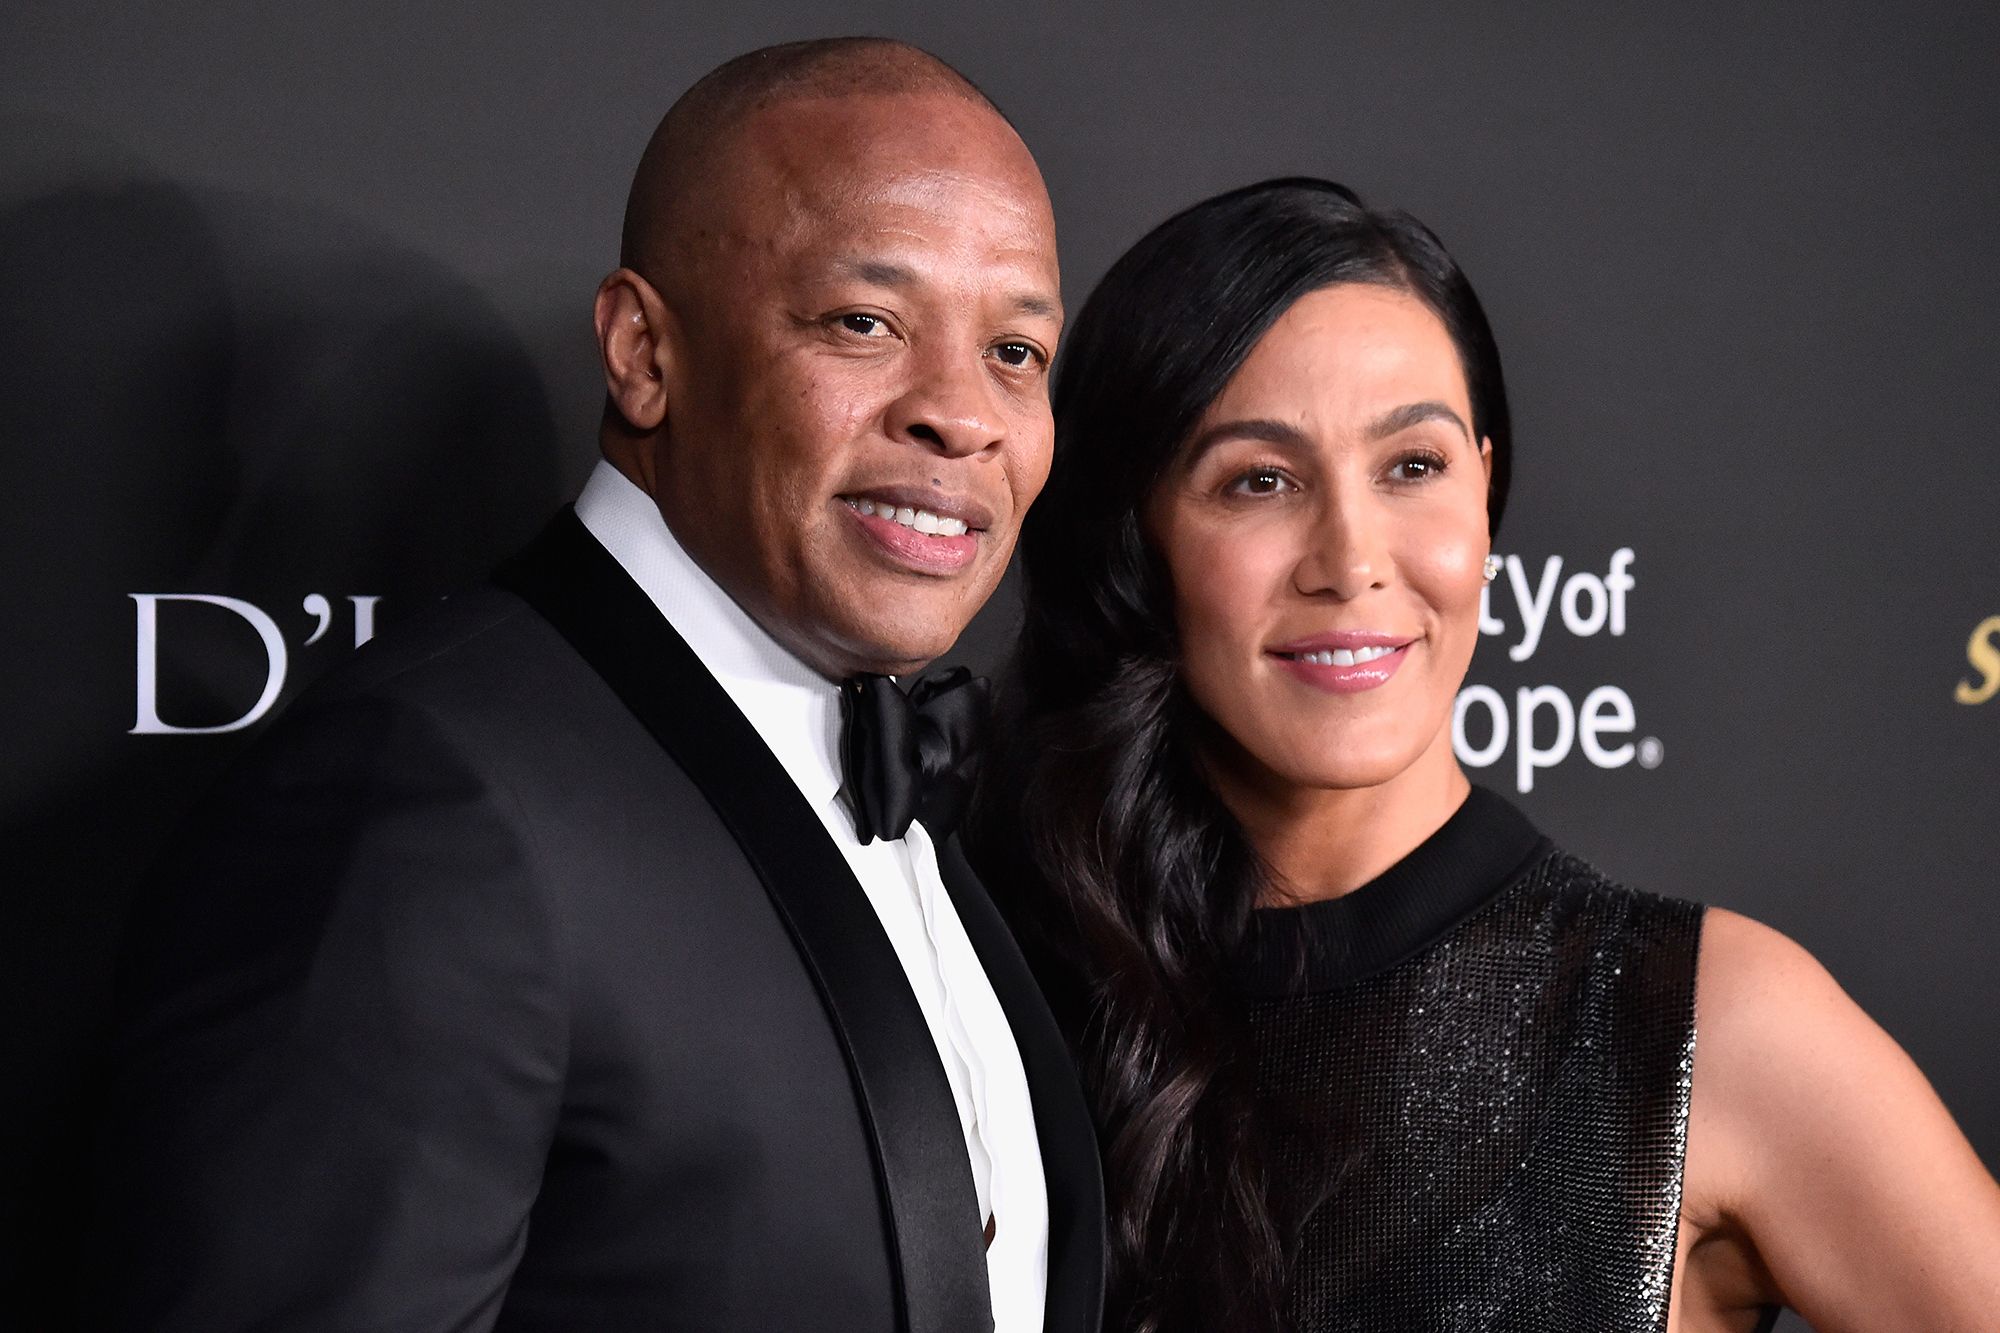 Dr. Dre to pay ex-wife $100M in huge divorce settlement